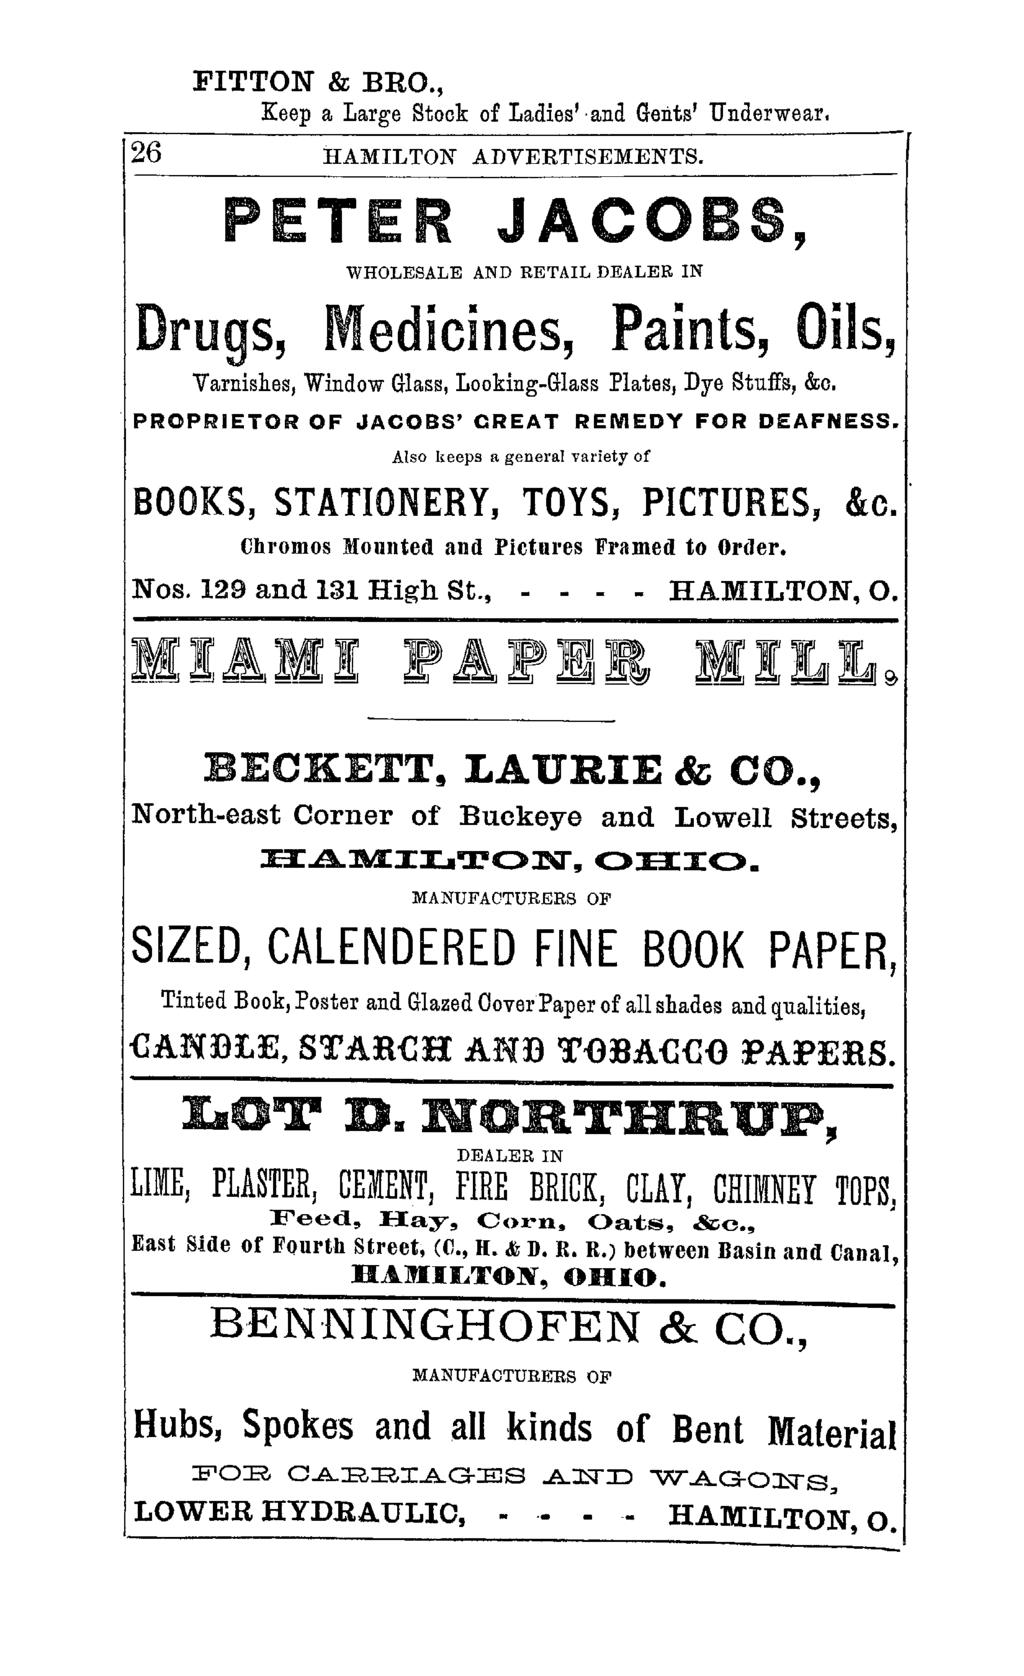 FITTON & BRO., Keep a Large Stock of Ladies' and Gents' Underwear. 26 HAMILTON ADVERTISEMENTS.